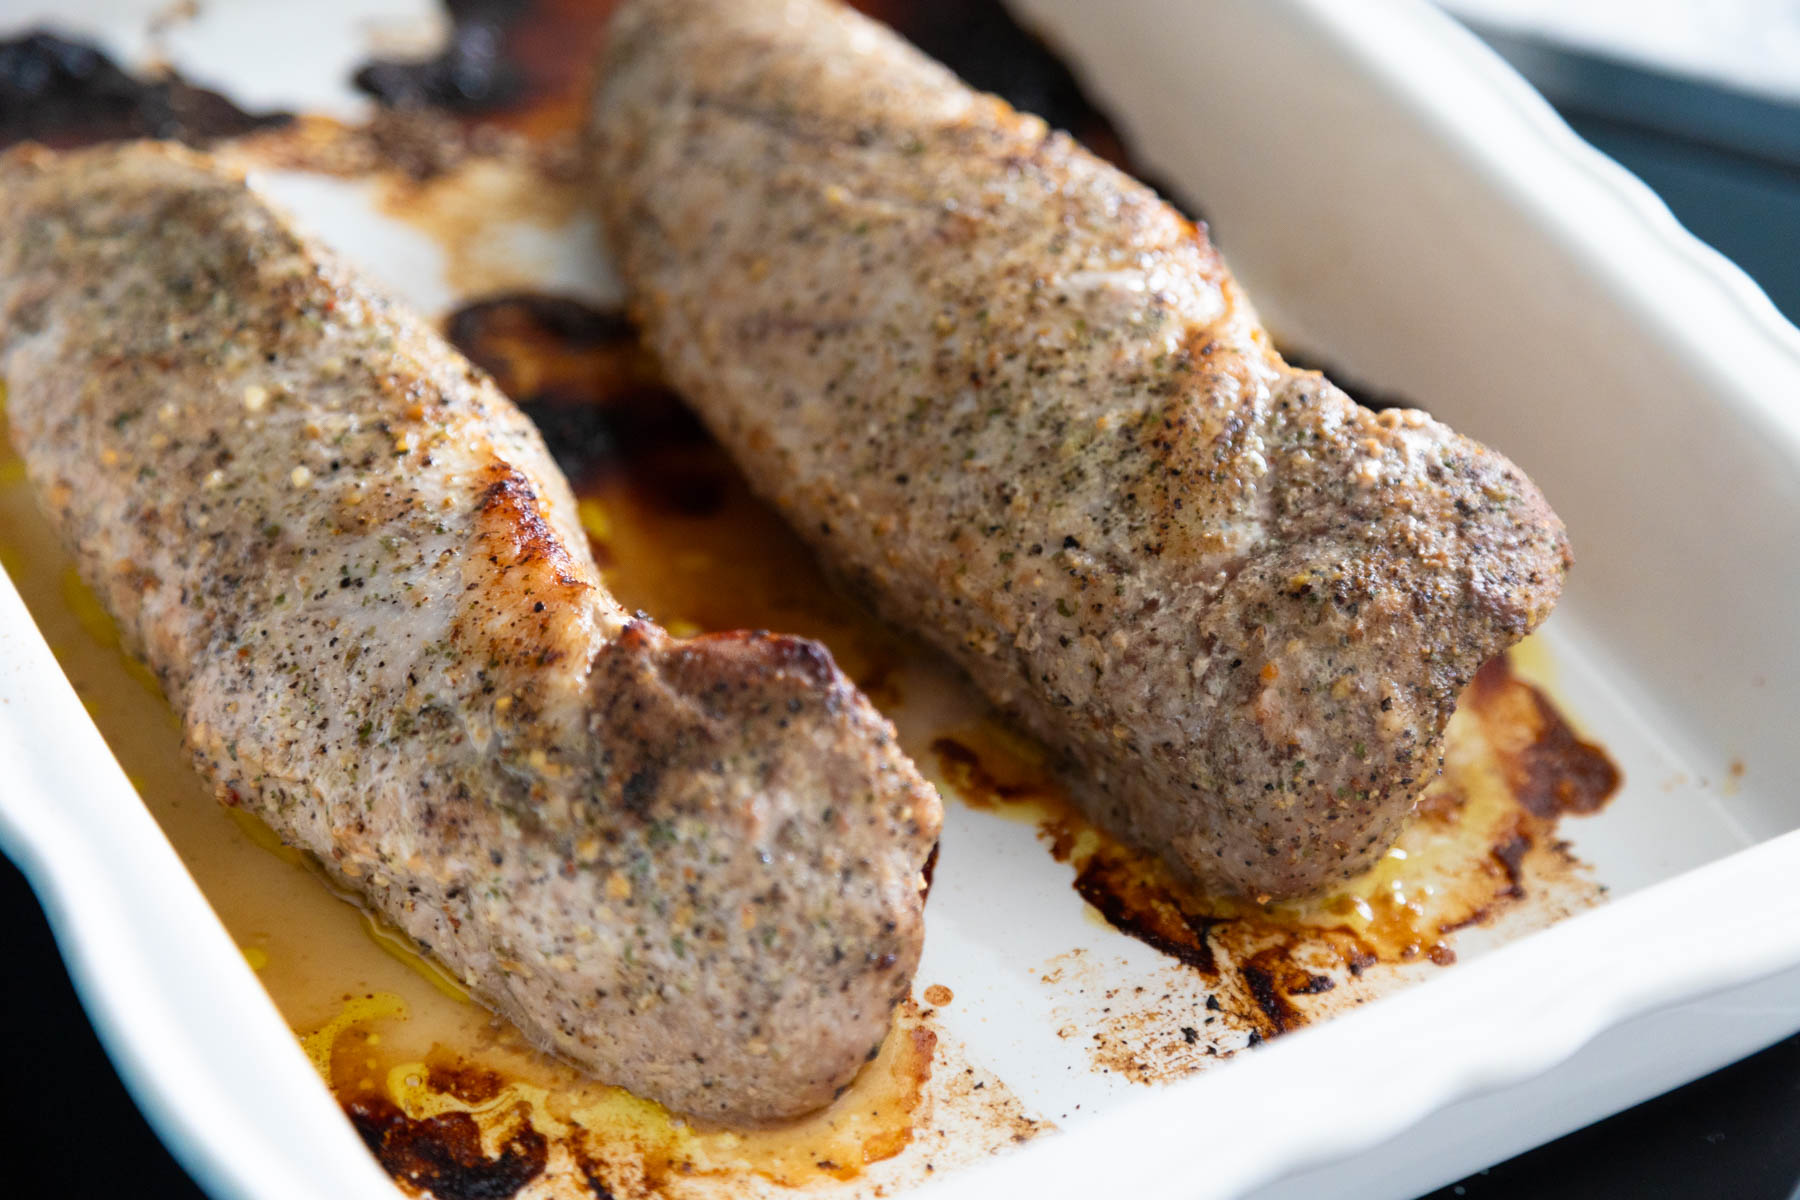 The pork tenderloins now have crispy golden edges from being roasted in the oven.